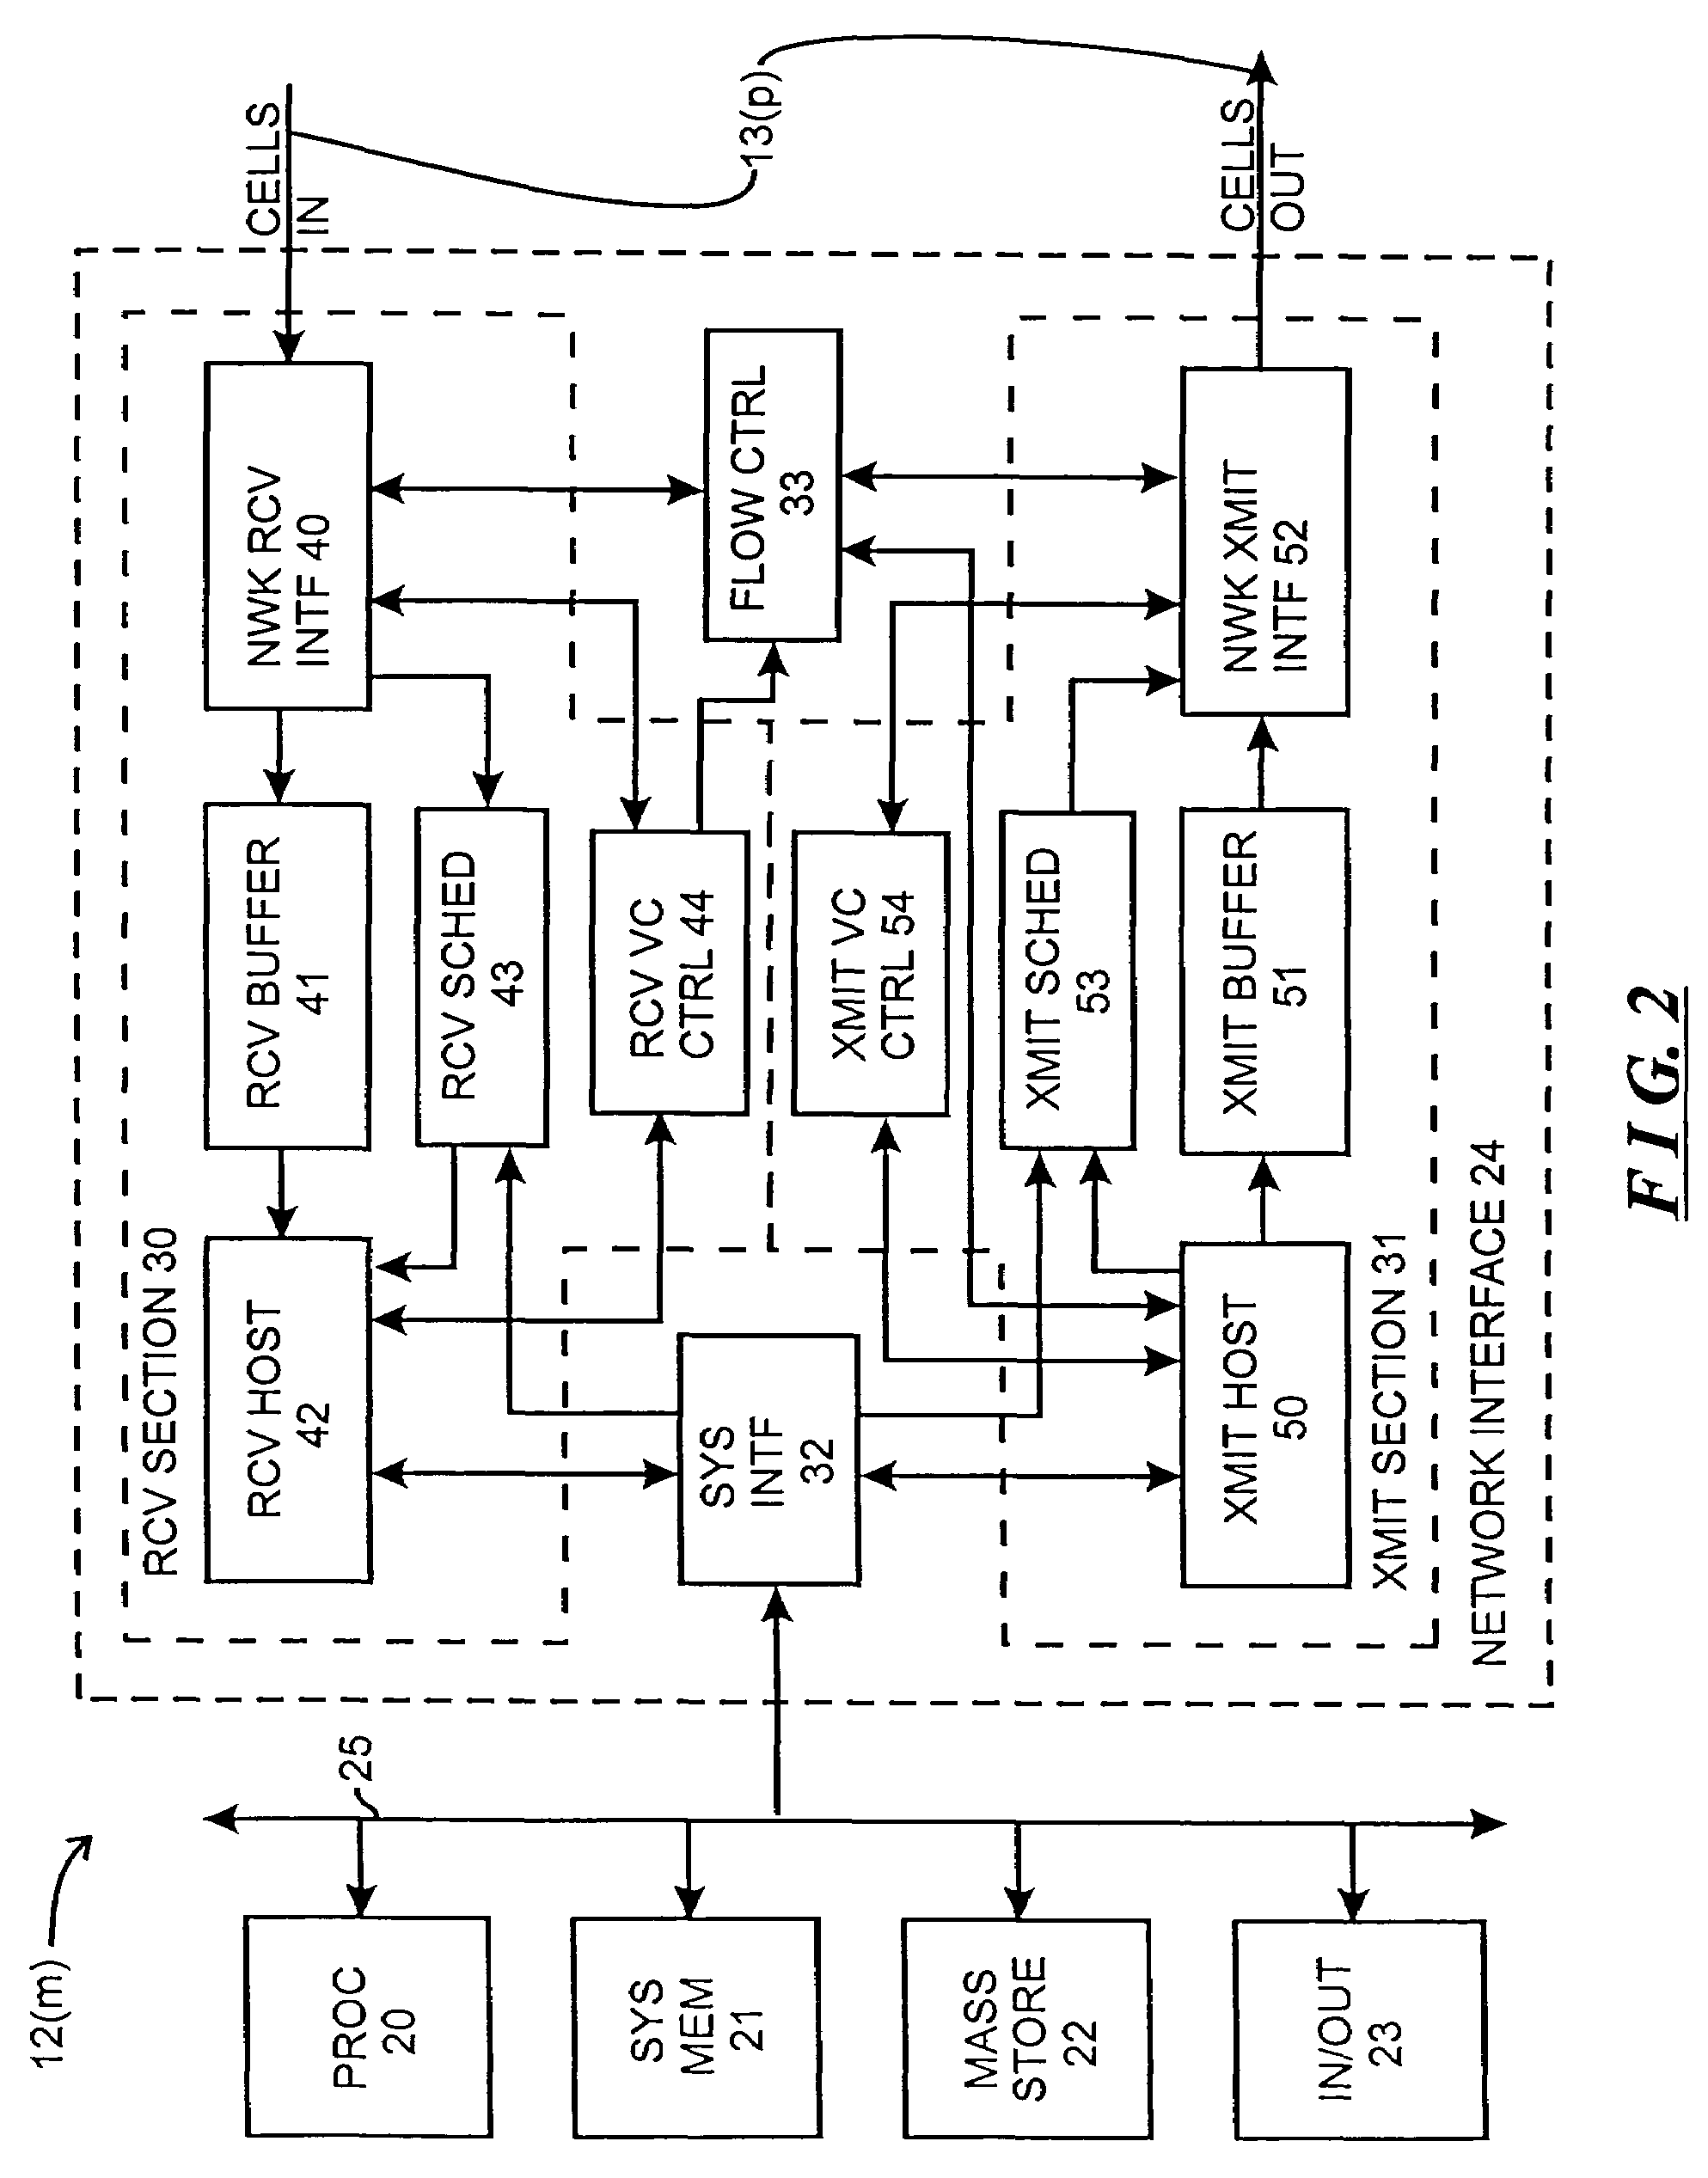 System and method for scheduling message transmission and processing in a digital data network